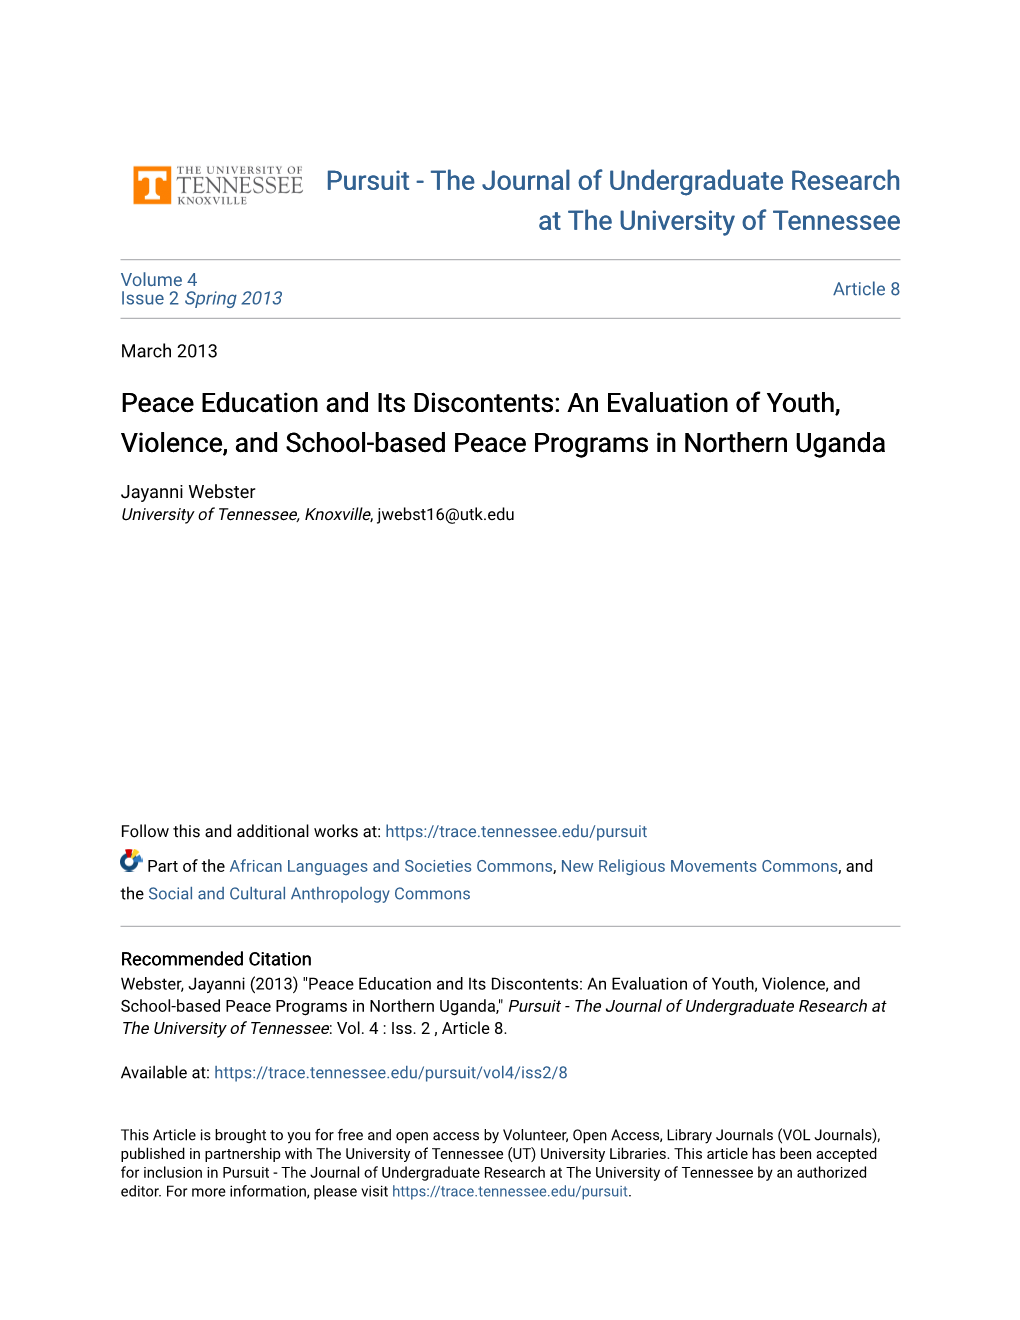 An Evaluation of Youth, Violence, and School-Based Peace Programs in Northern Uganda